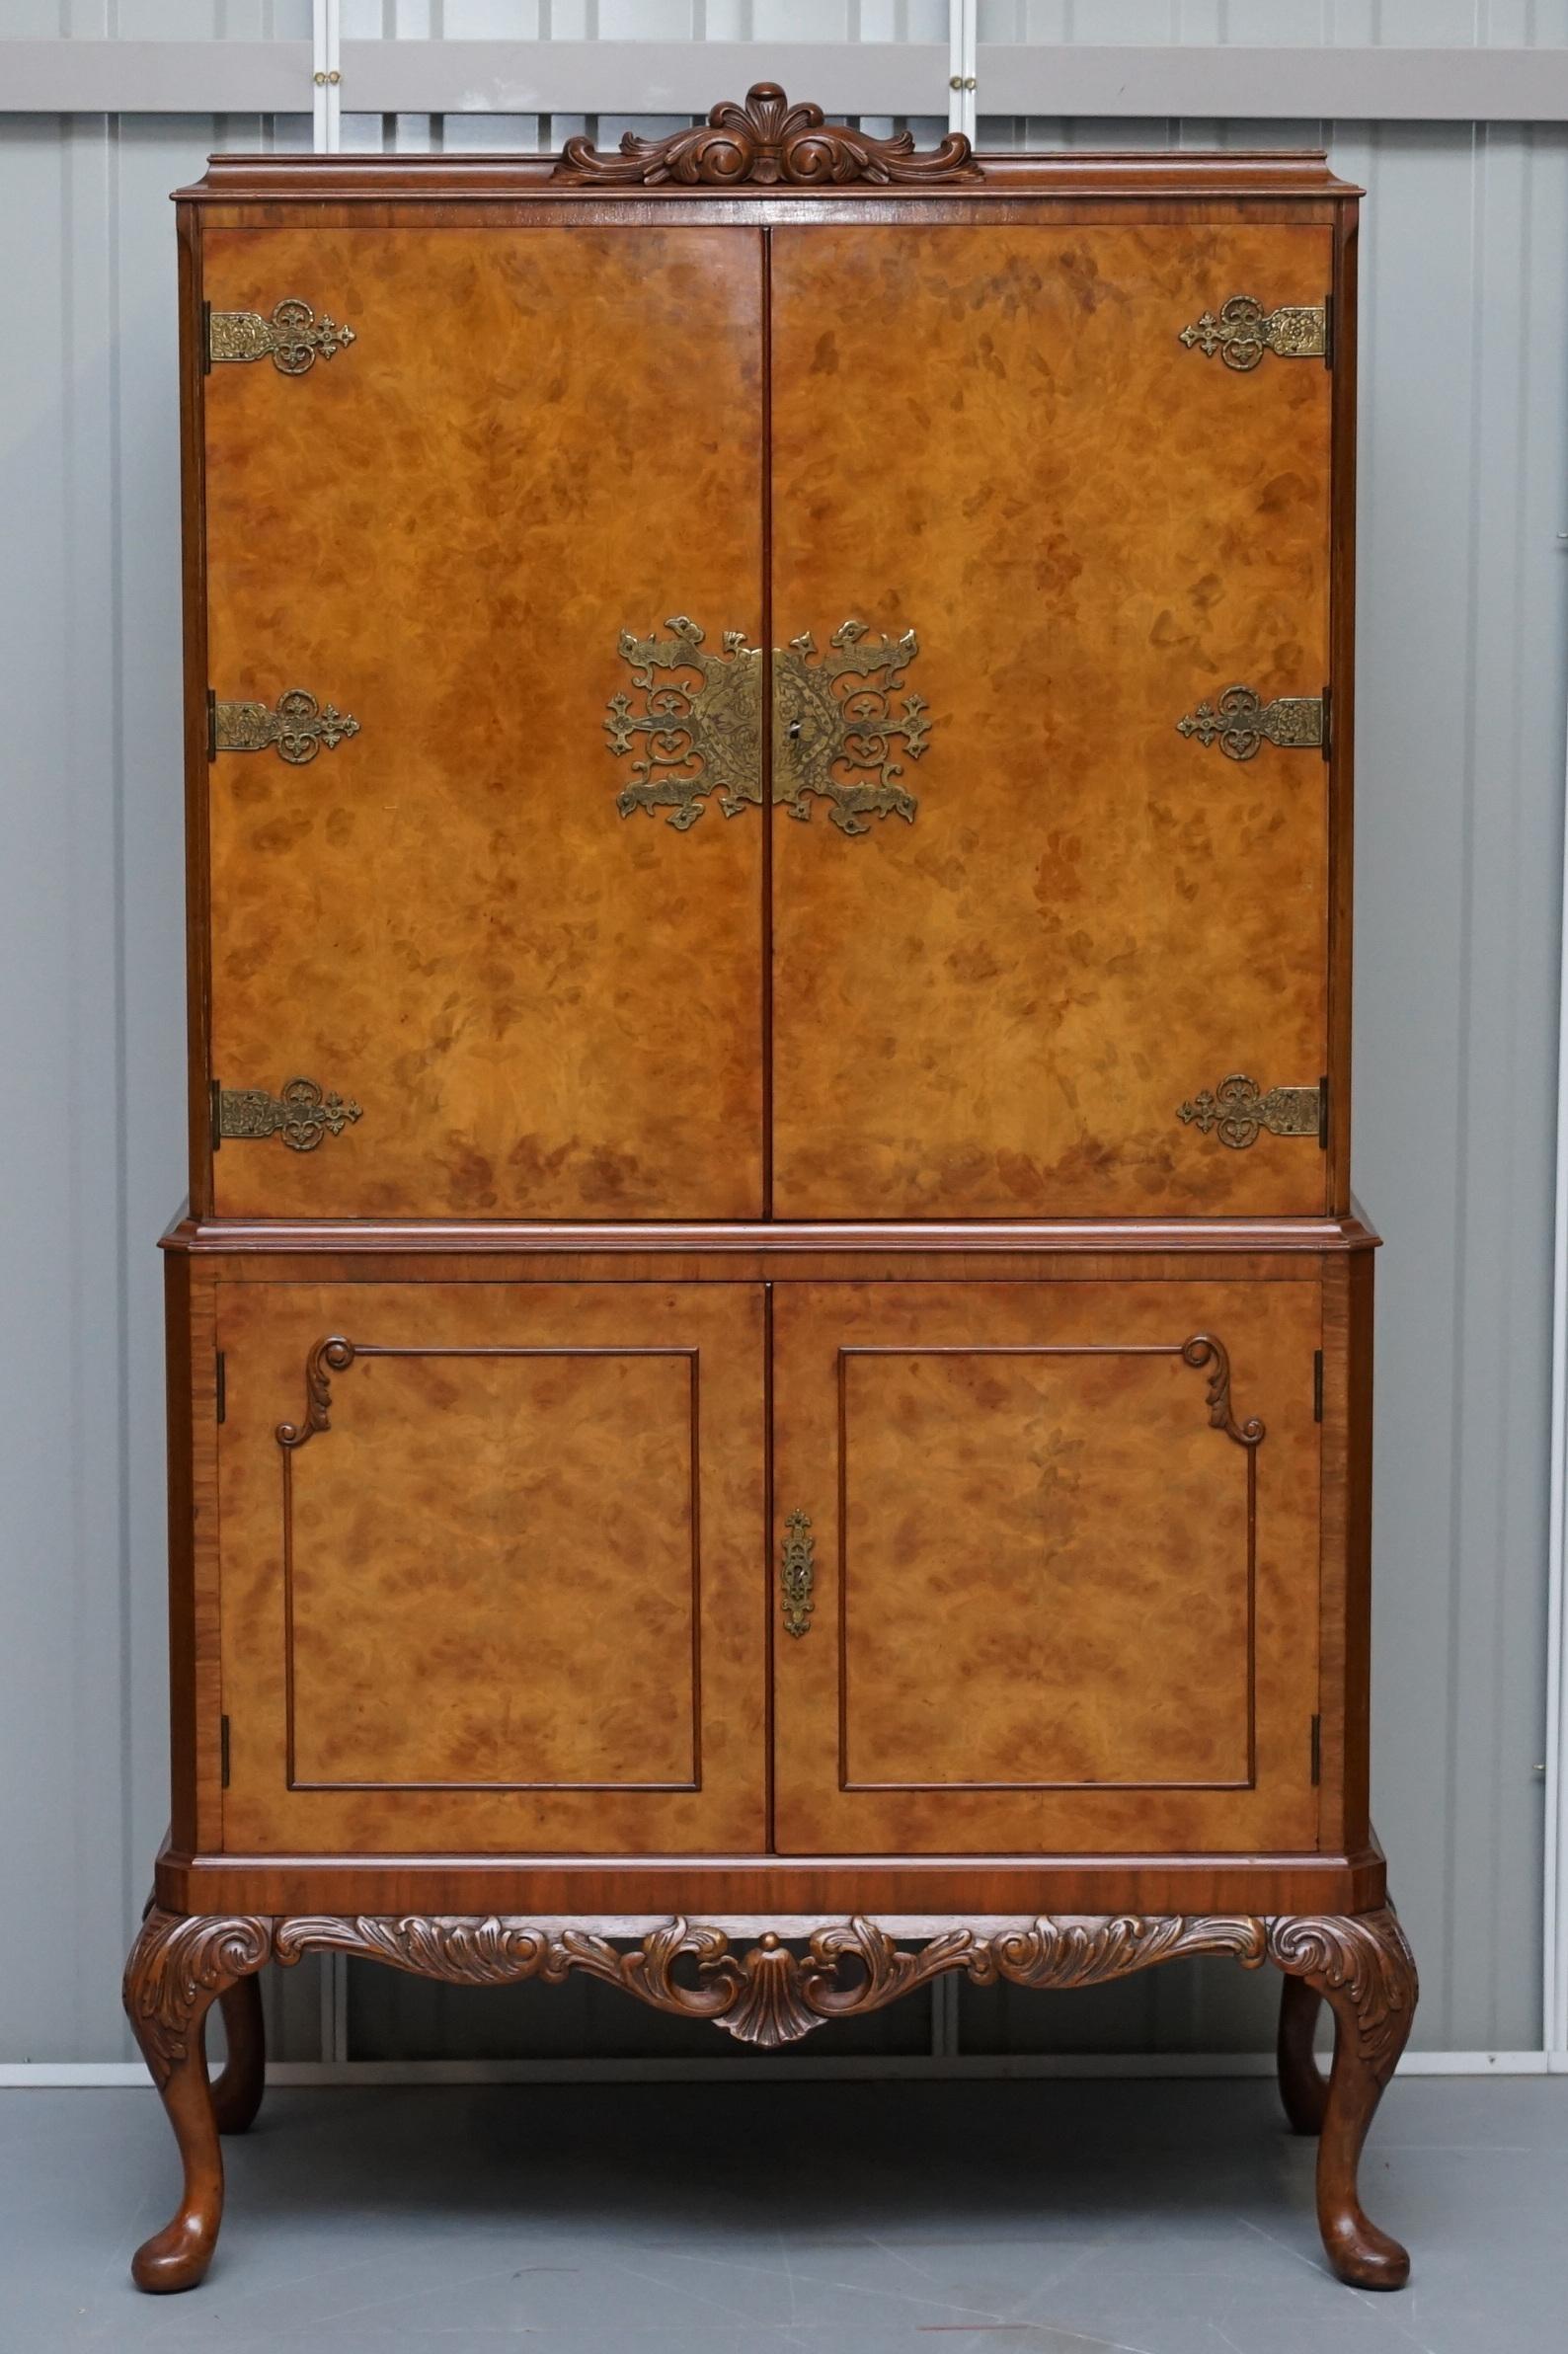 We are delighted to offer for sale this absolutely stunning original Art Deco circa 1920 burr walnut drinks cabinet with glass shelves

A very good looking and decorative piece of furniture. The top section has a large cupboard for glasses, it has